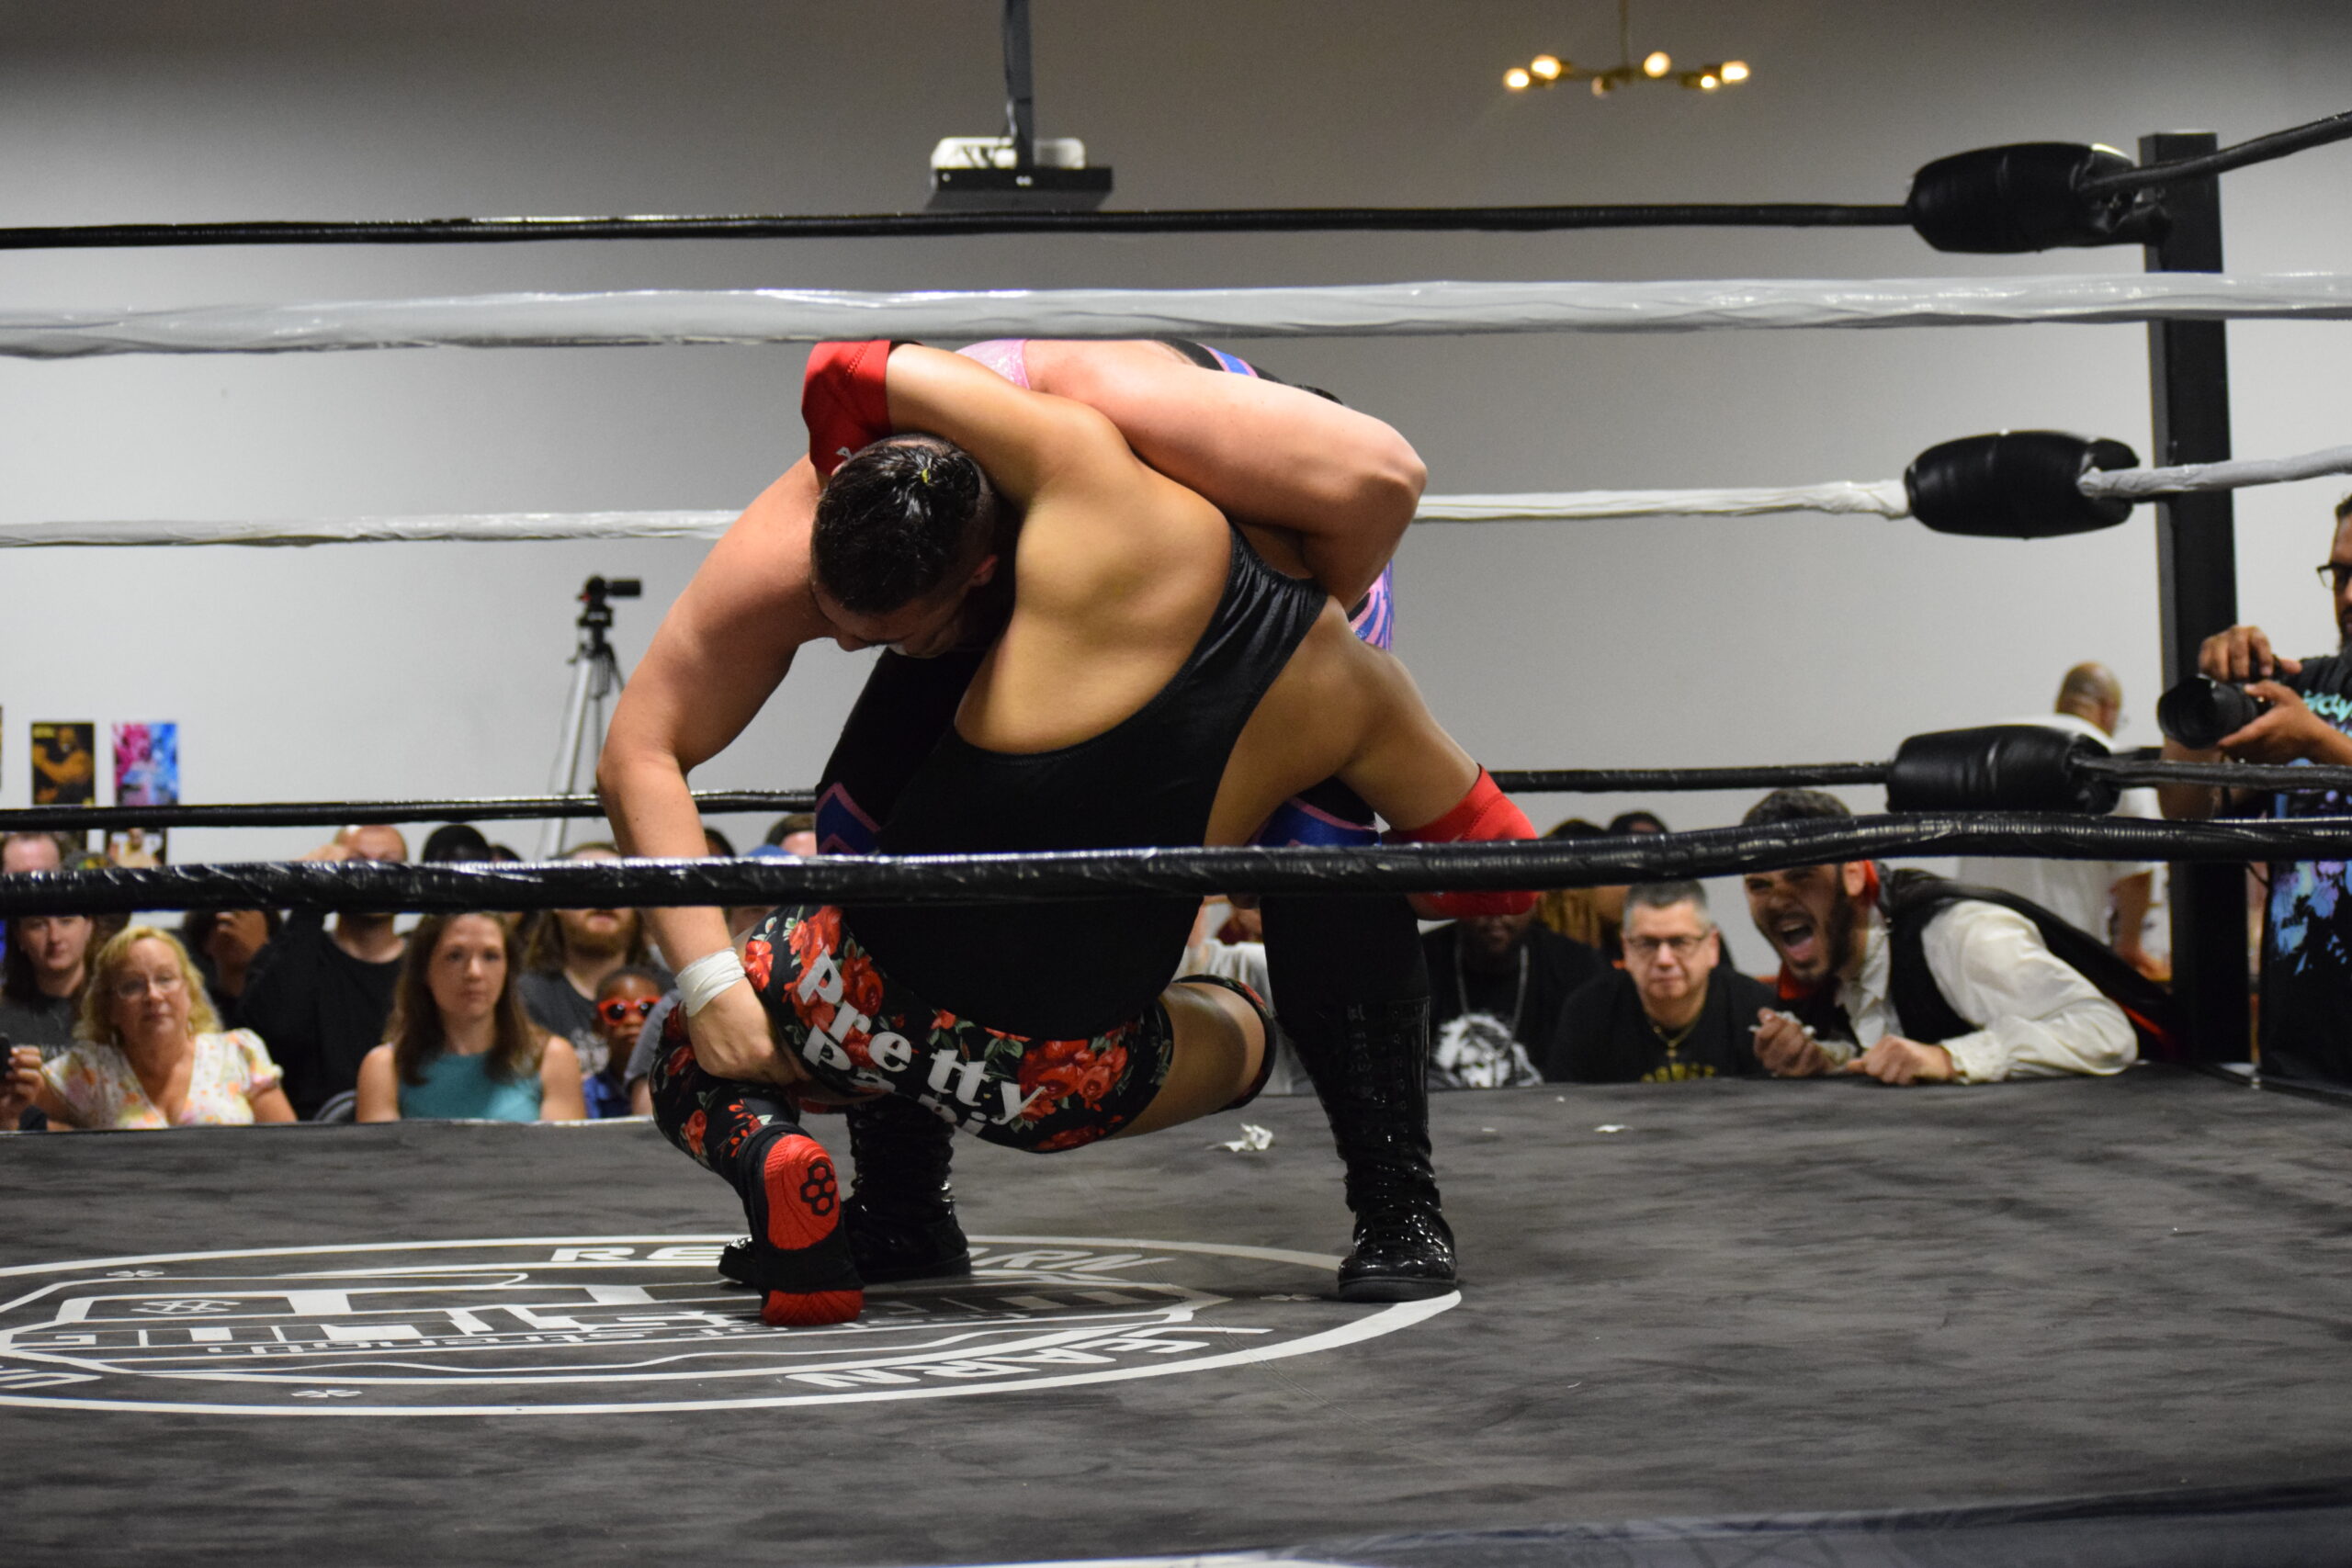 West Hartford hosts a series of professional wrestling matches – We-Ha